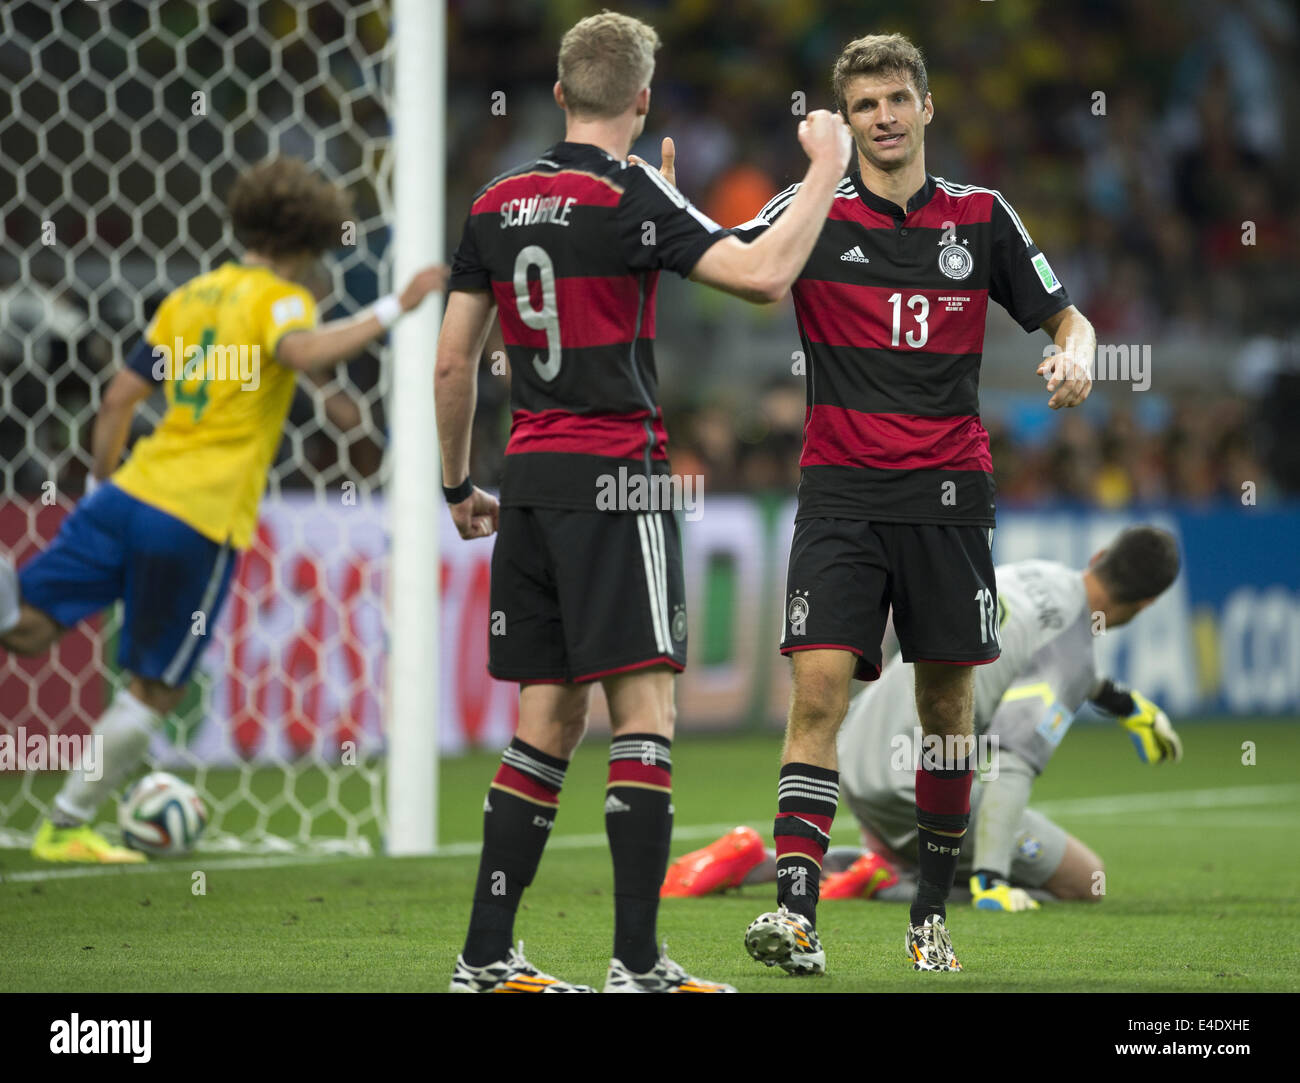 Belo Horizonte, Brazil. 8th July, 2014.  Schurrle and Thomas Muller celebration in semifinal match between Brazil and Germany, played at Mineirao stadium, 08 July 2014, correspondind to the 2014 World Cup. Photo: Urbanandsport/Nurphoto. Credit:  Urbanandsport/NurPhoto/ZUMA Wire/Alamy Live News Stock Photo